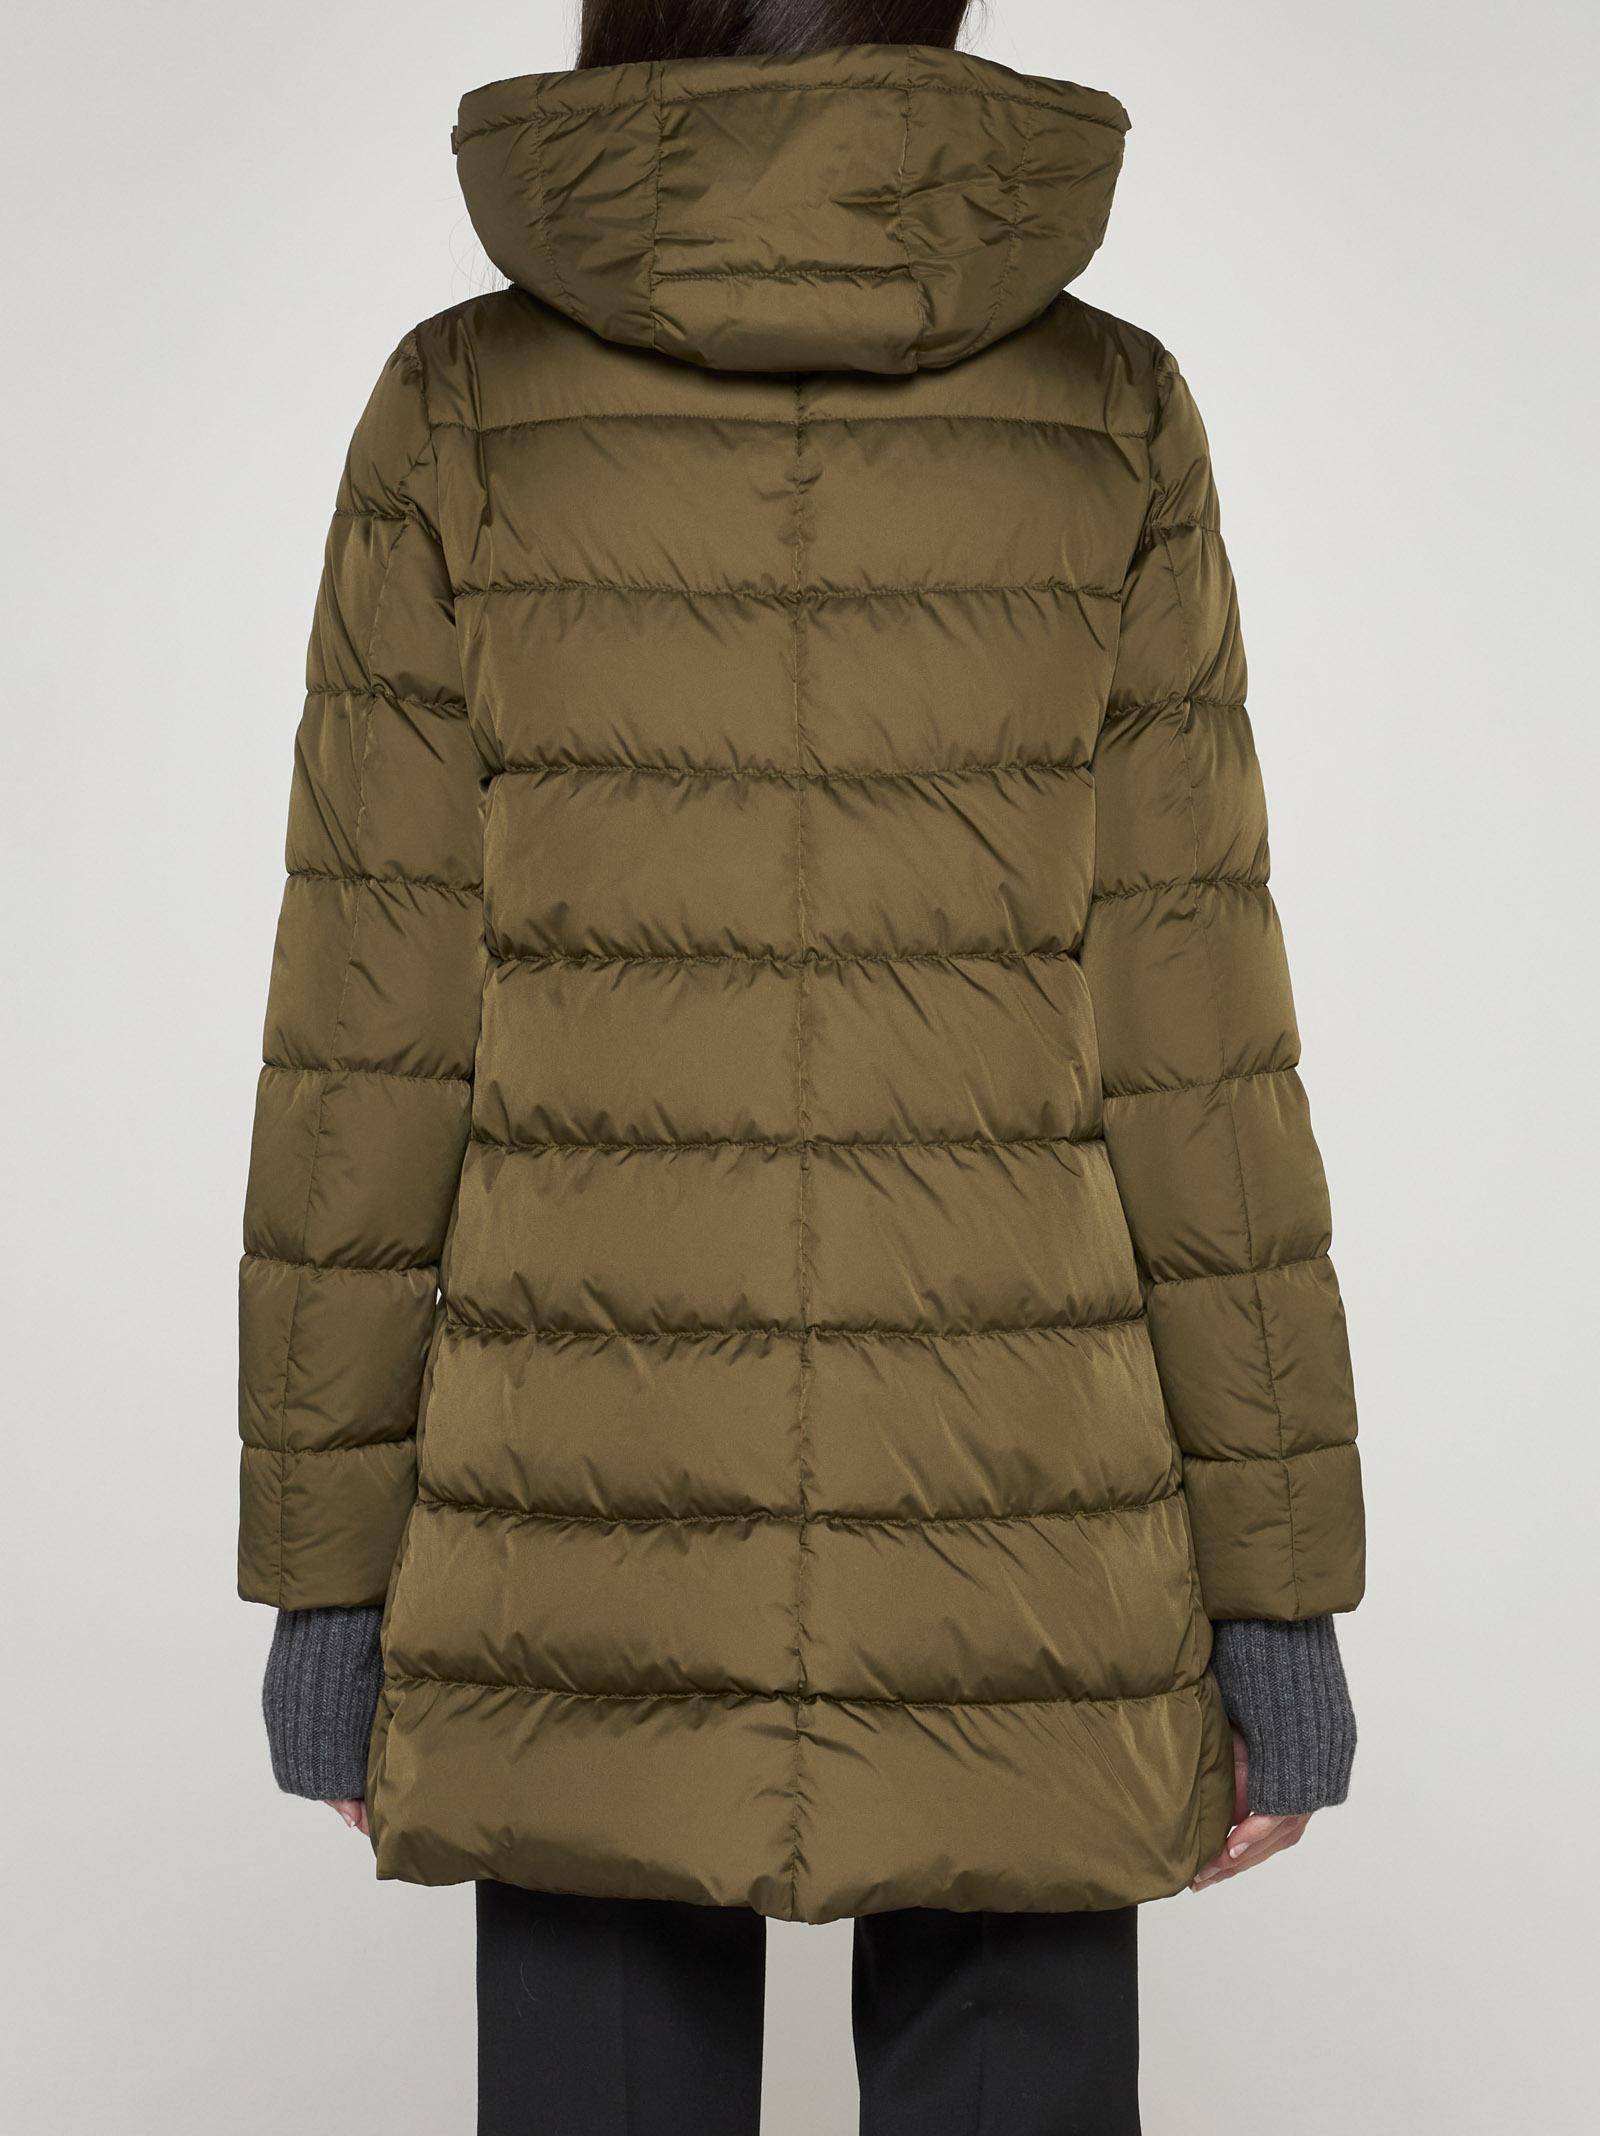 Herno Chamonix Quilted Nylon Down Jacket in Green | Lyst